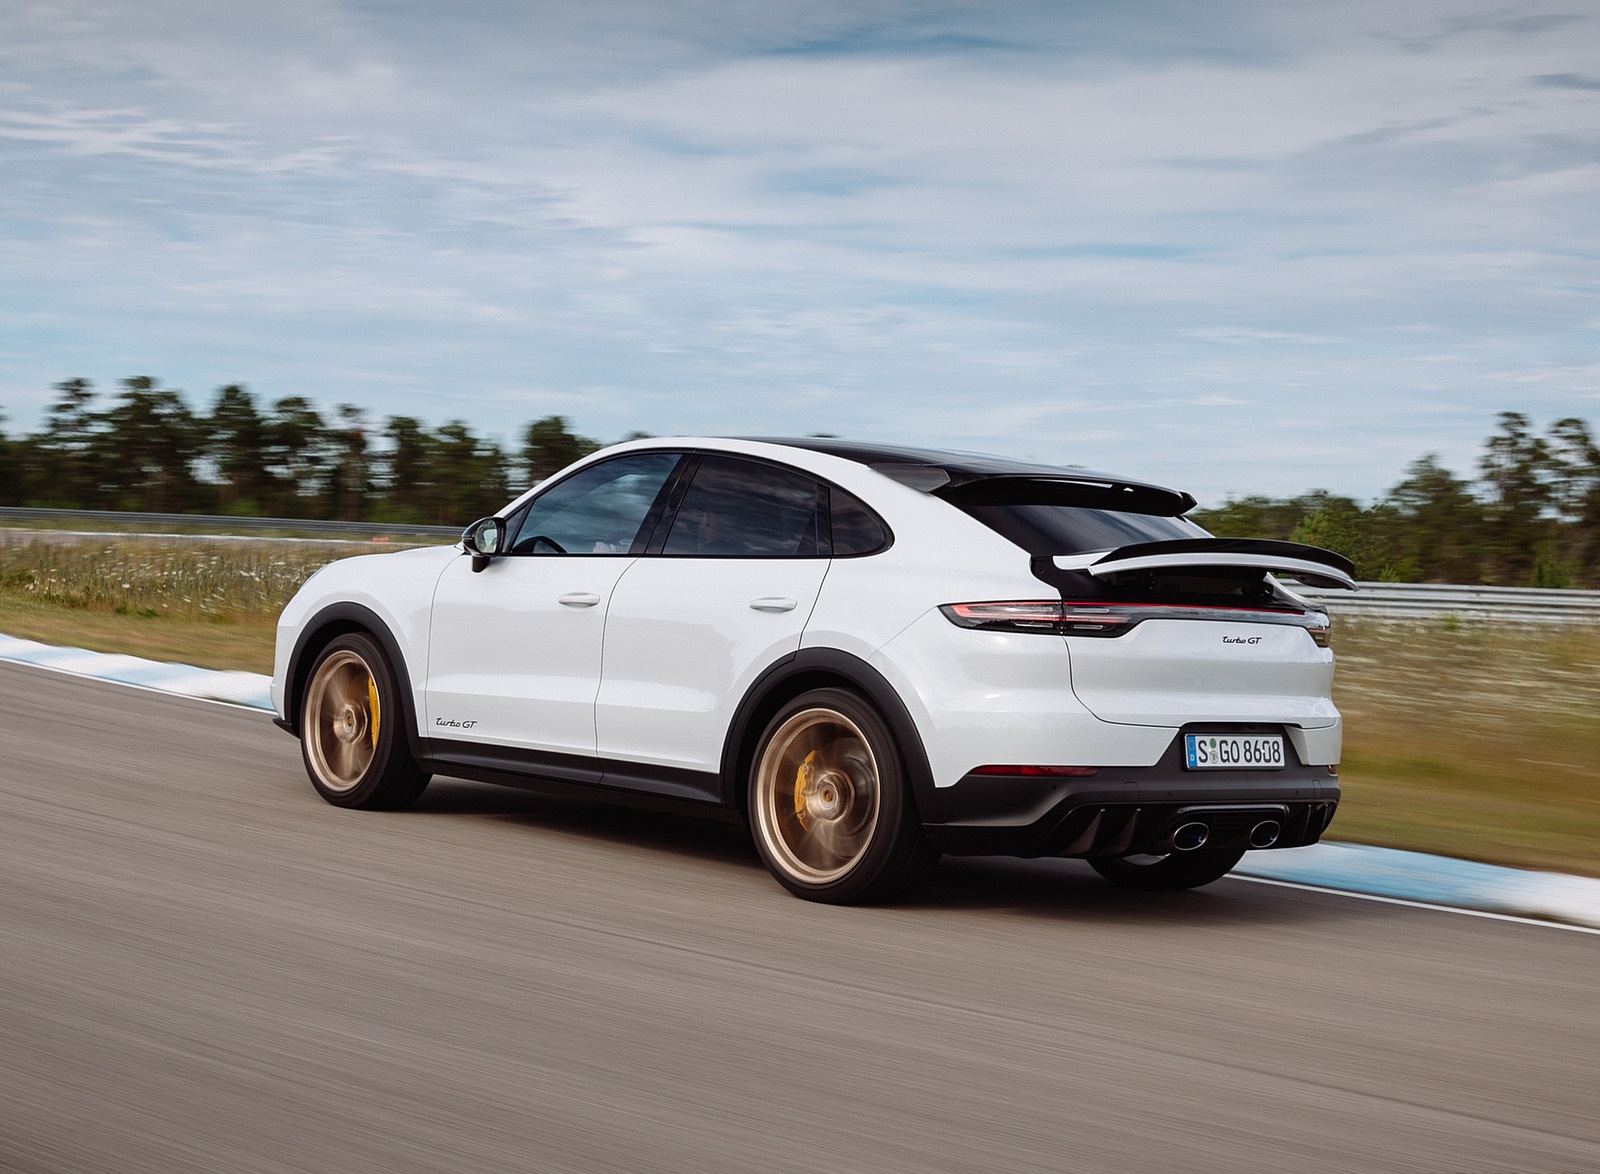 2022 Porsche Cayenne Turbo GT (Color: White) Rear Three-Quarter Wallpapers  #42 of 231